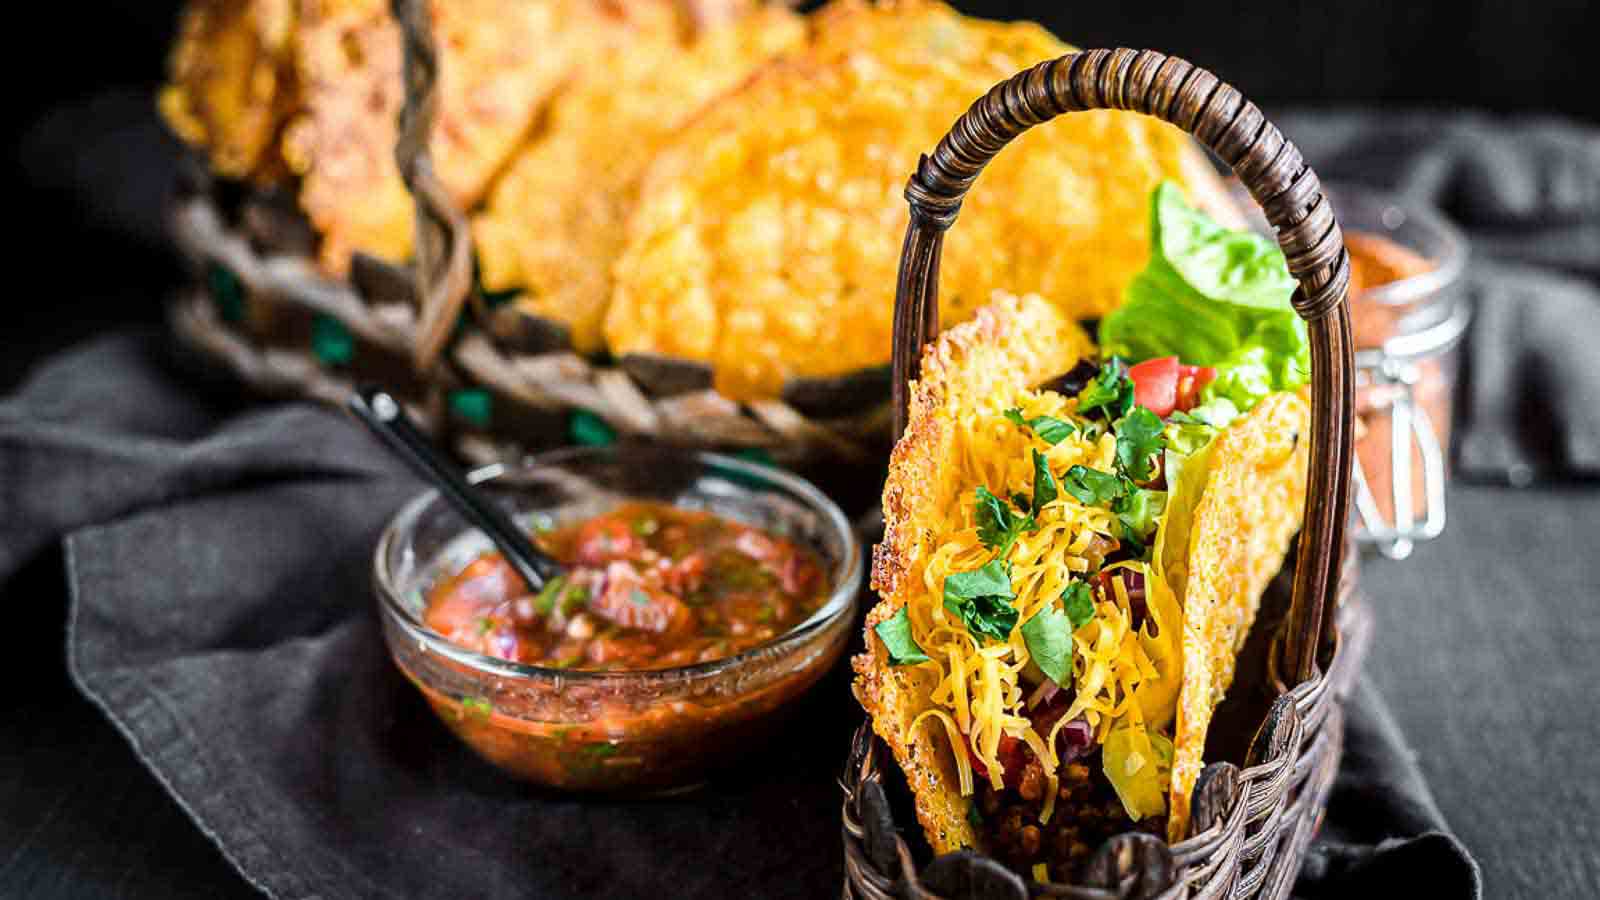 Mexican tacos in a basket with salsa and guacamole.